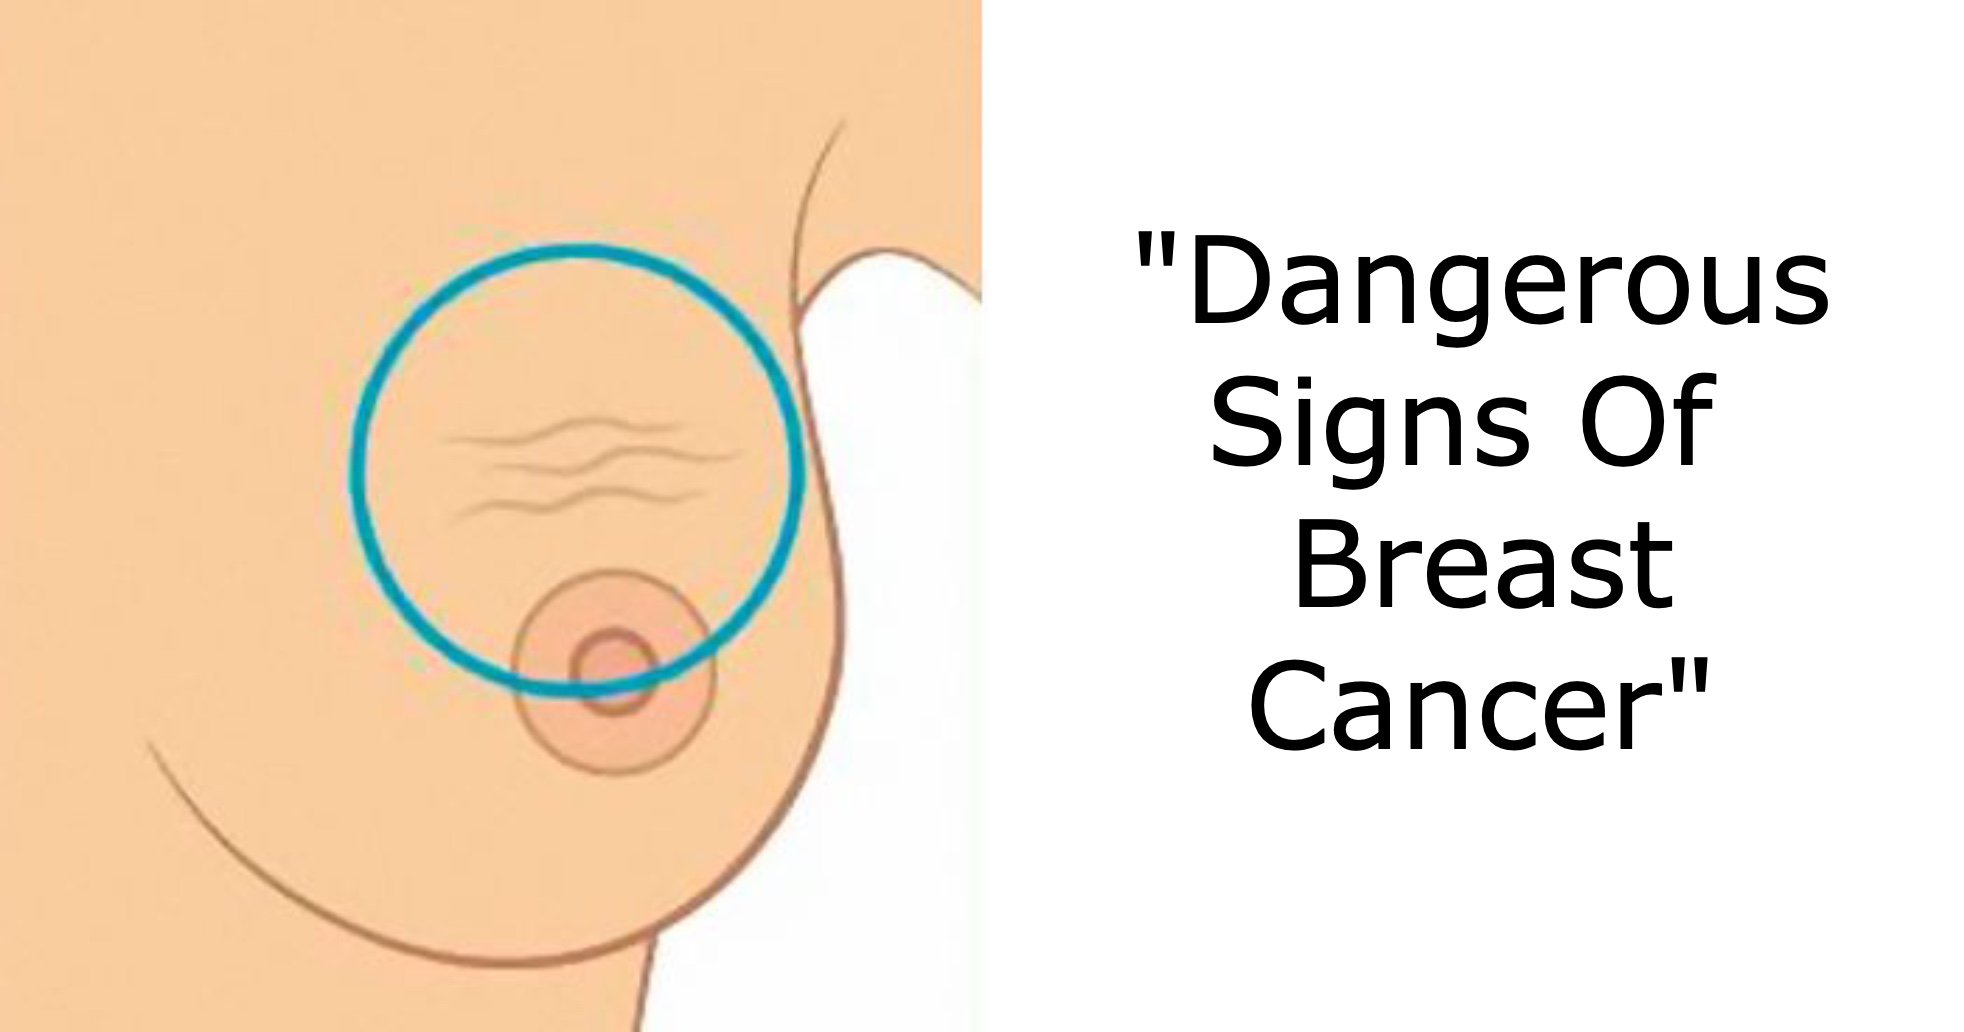 breast cane.jpg?resize=412,232 - 9 Common Warning Signs Of Breast Cancer That People Often Ignore